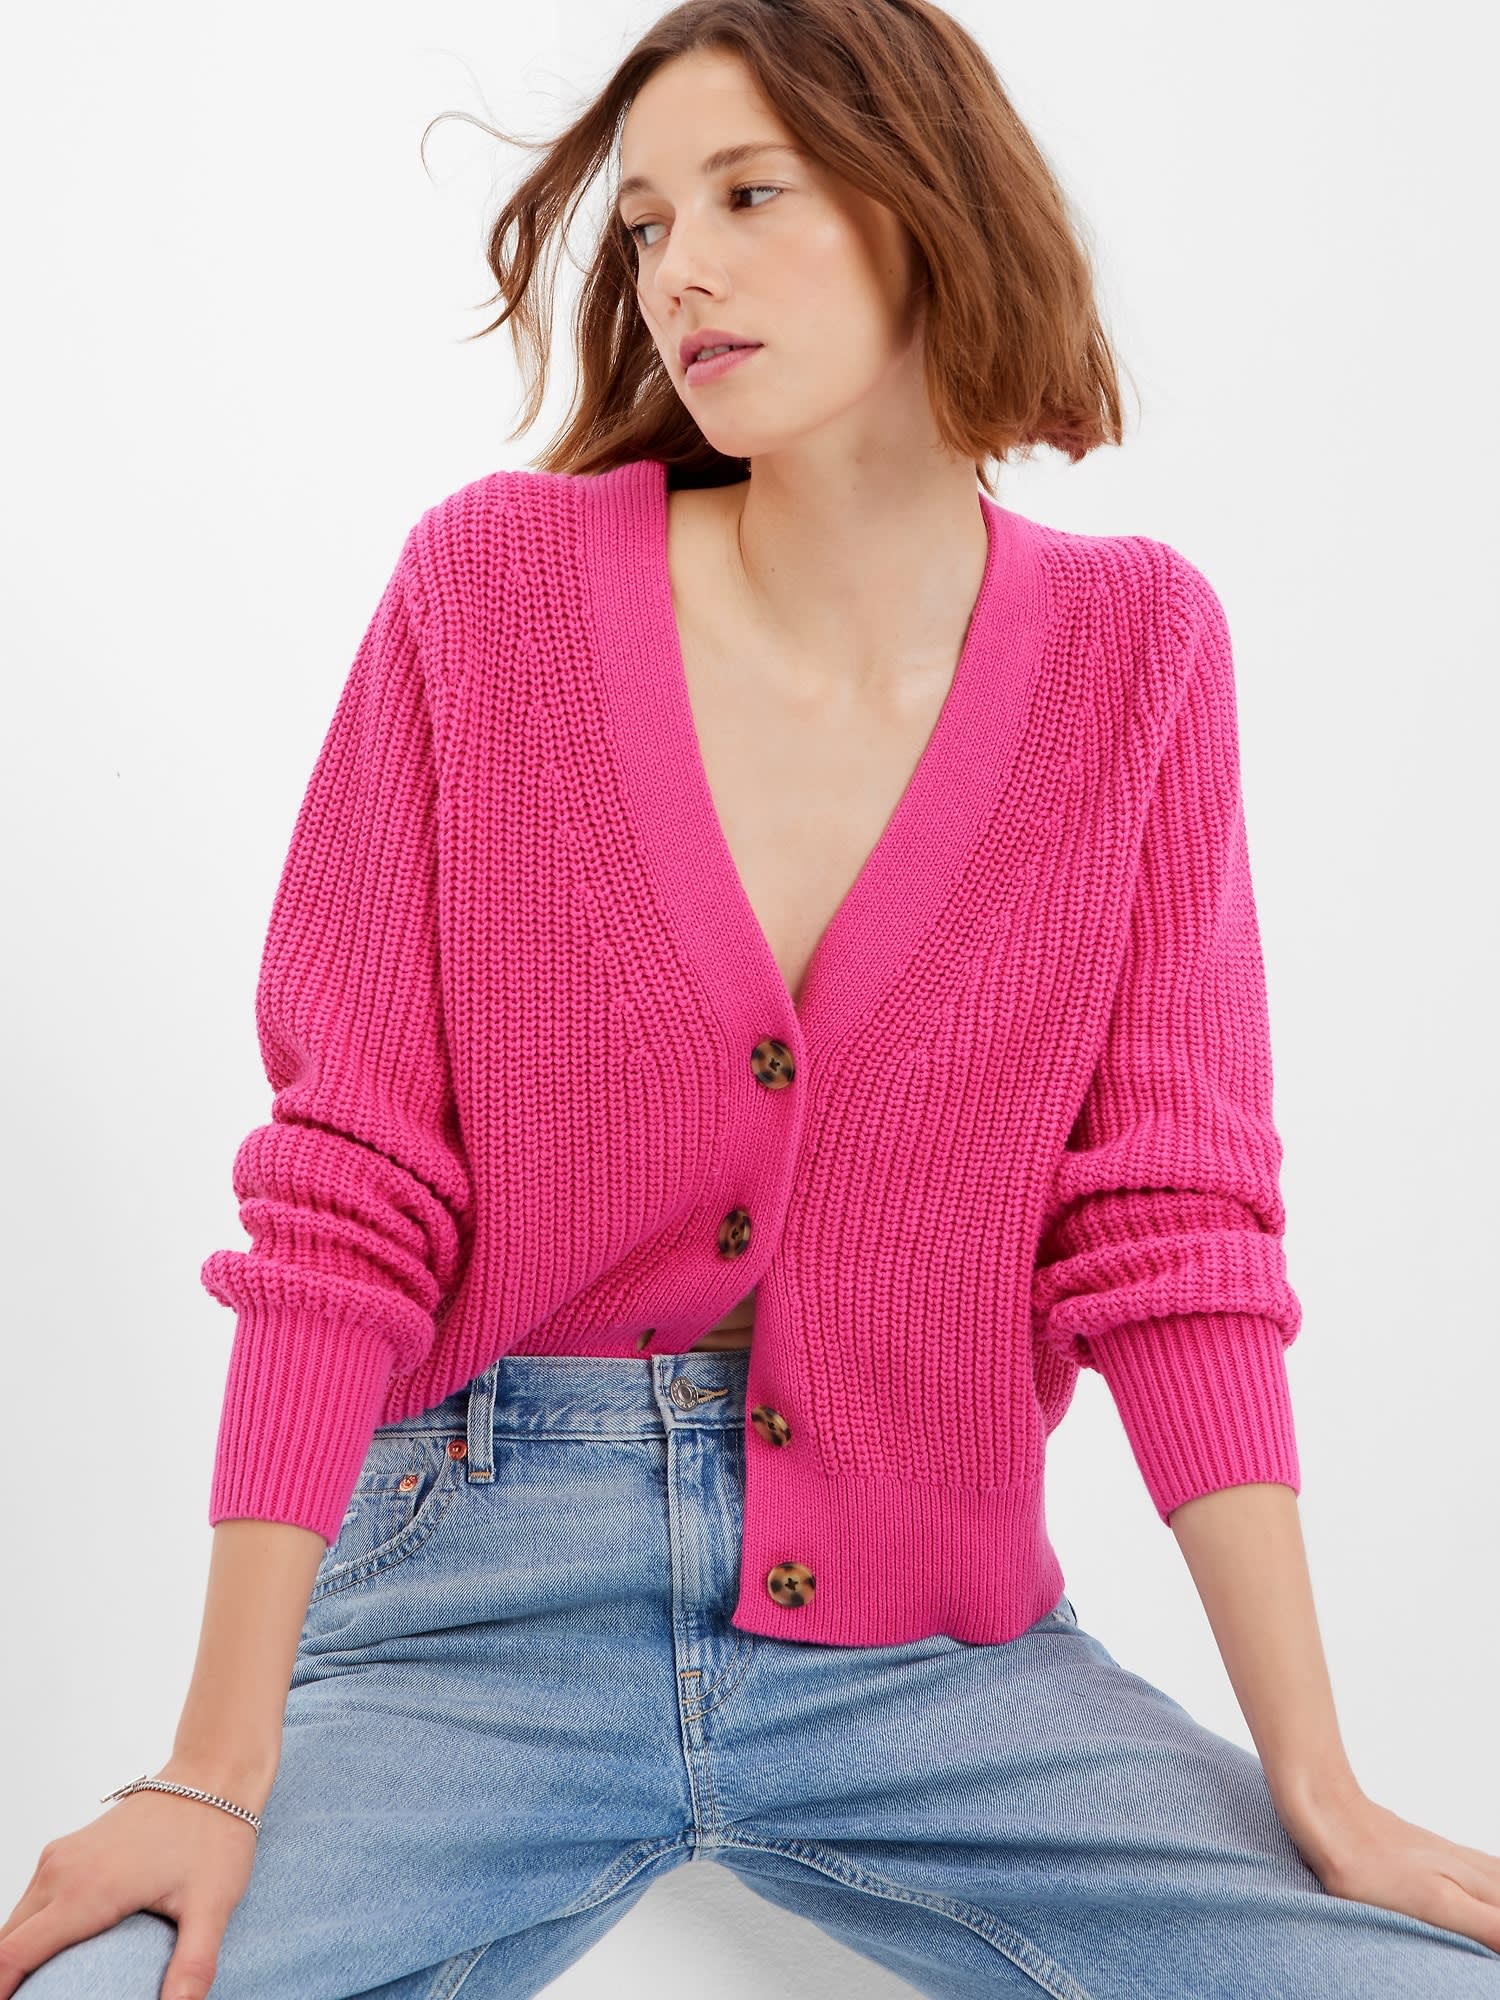 35 best cardigans for your wardrobe